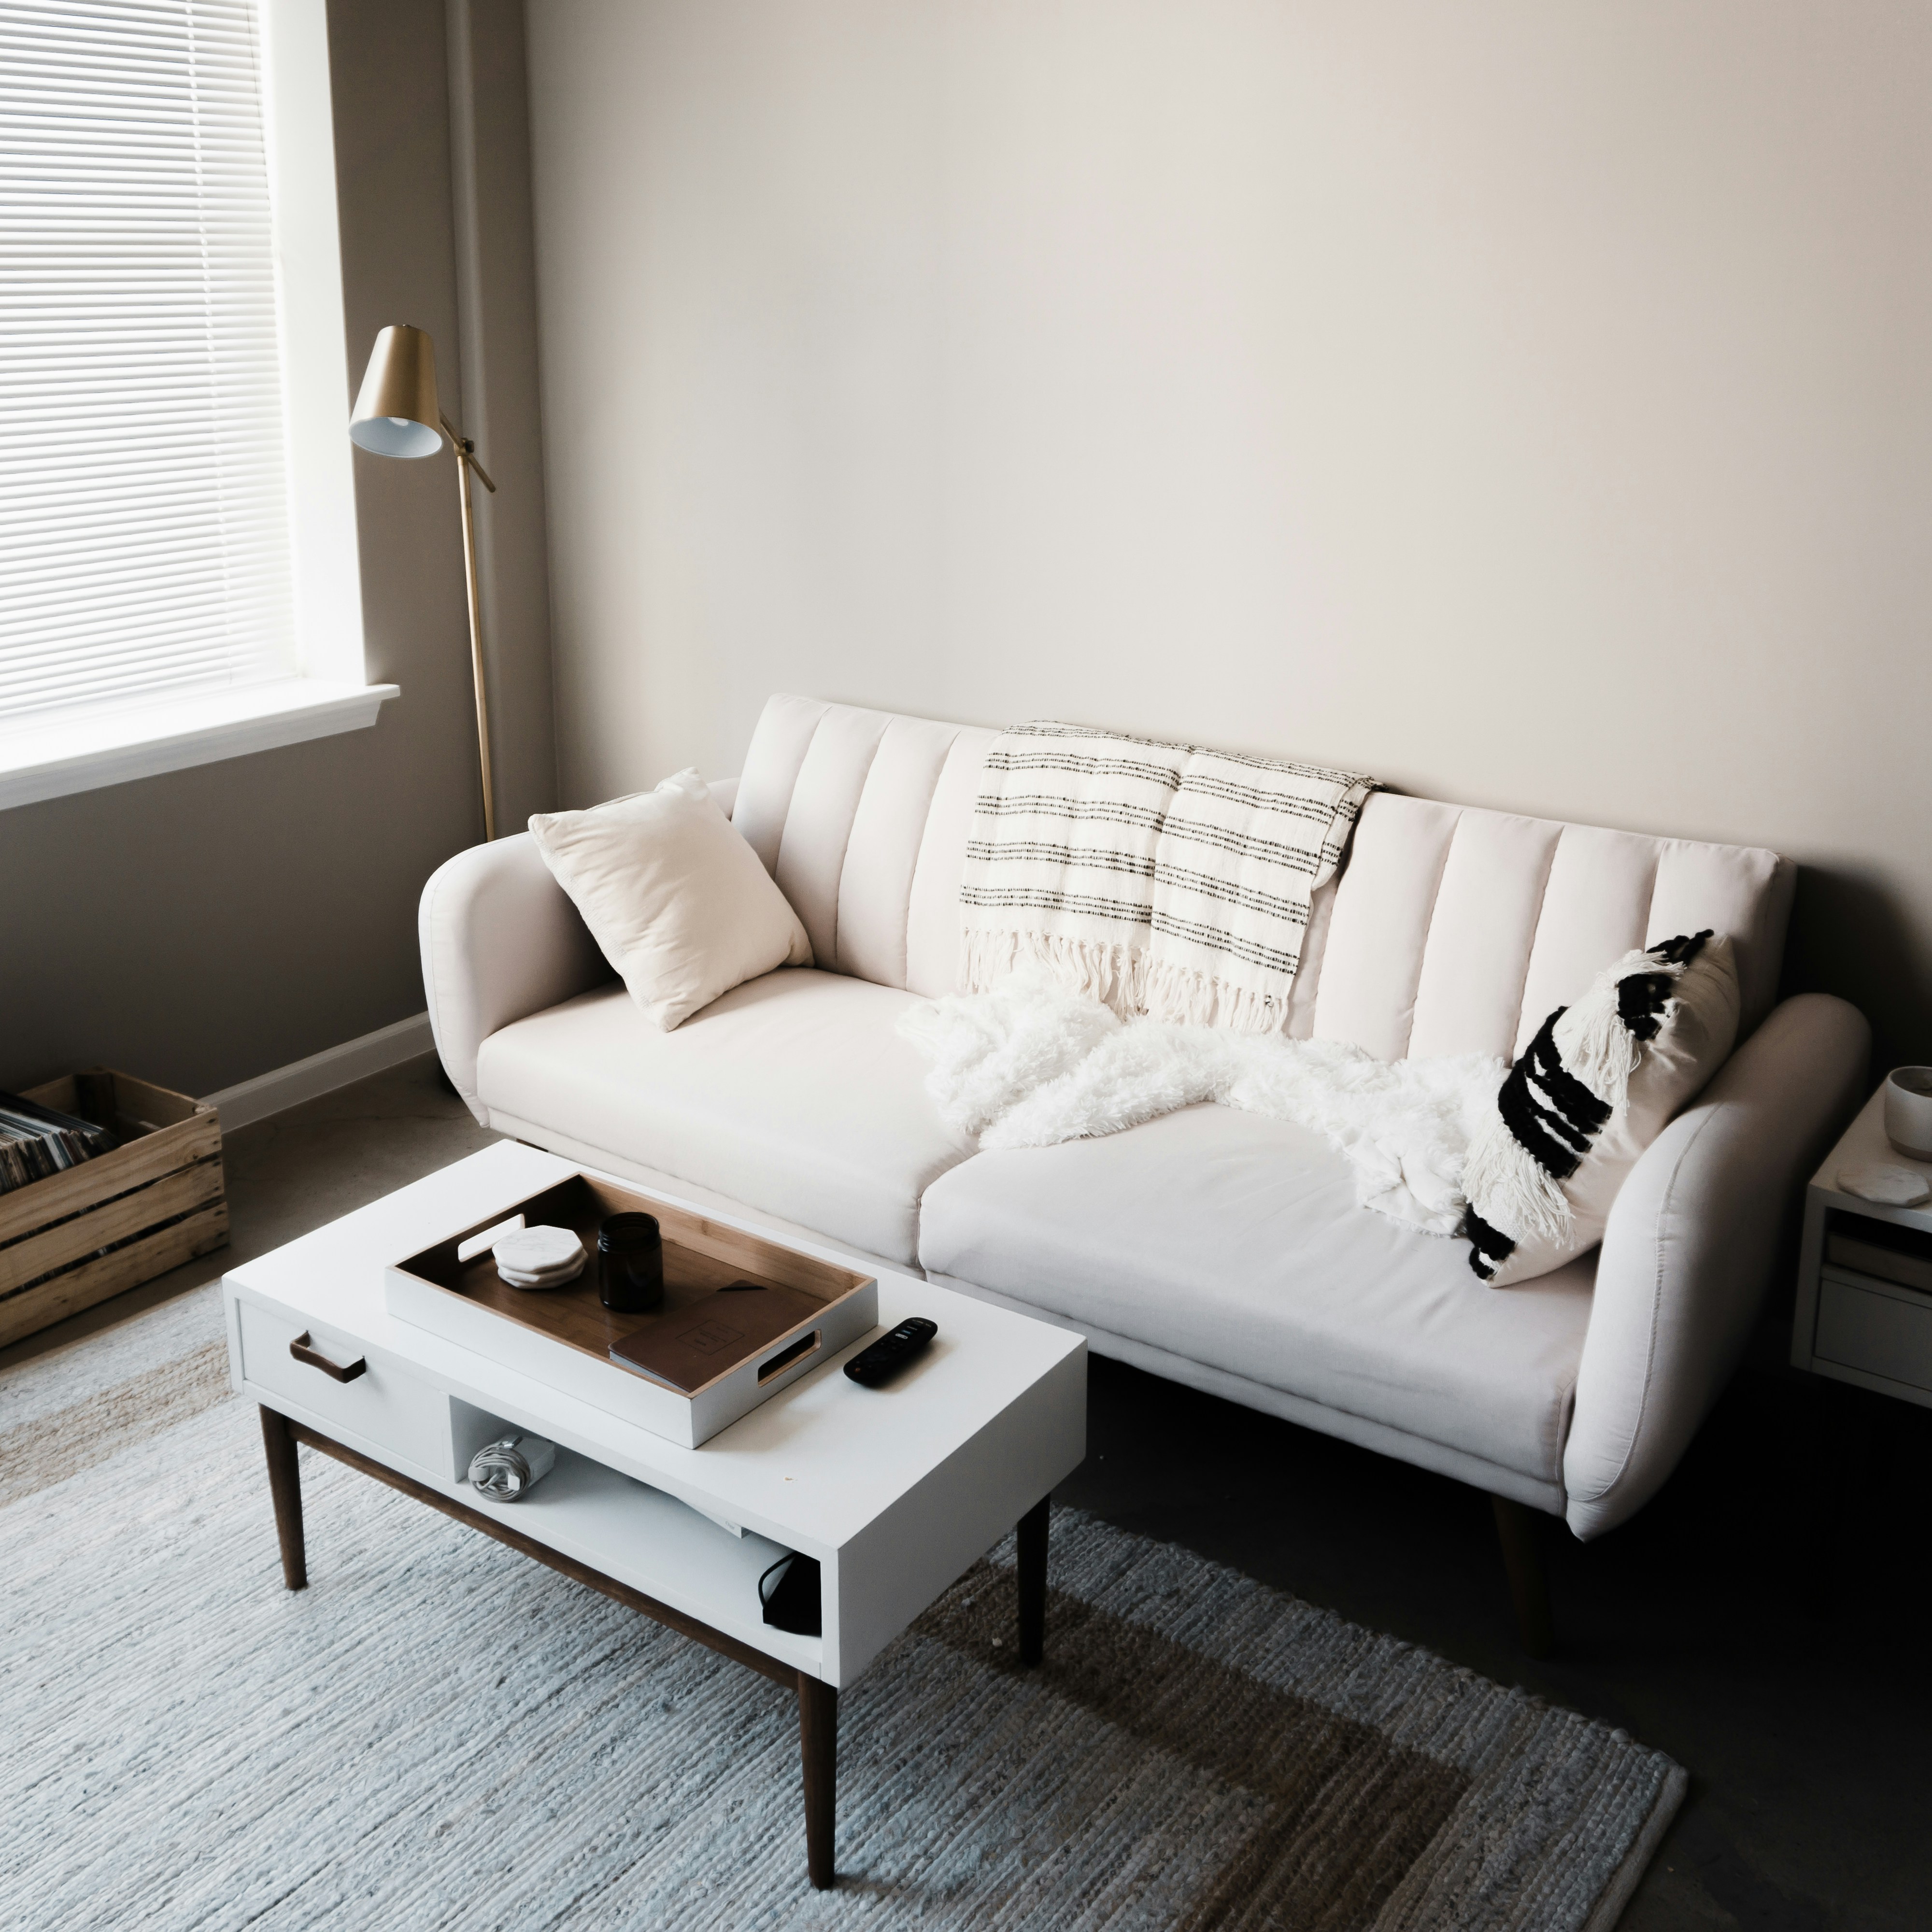 white couch in front of white wooden table